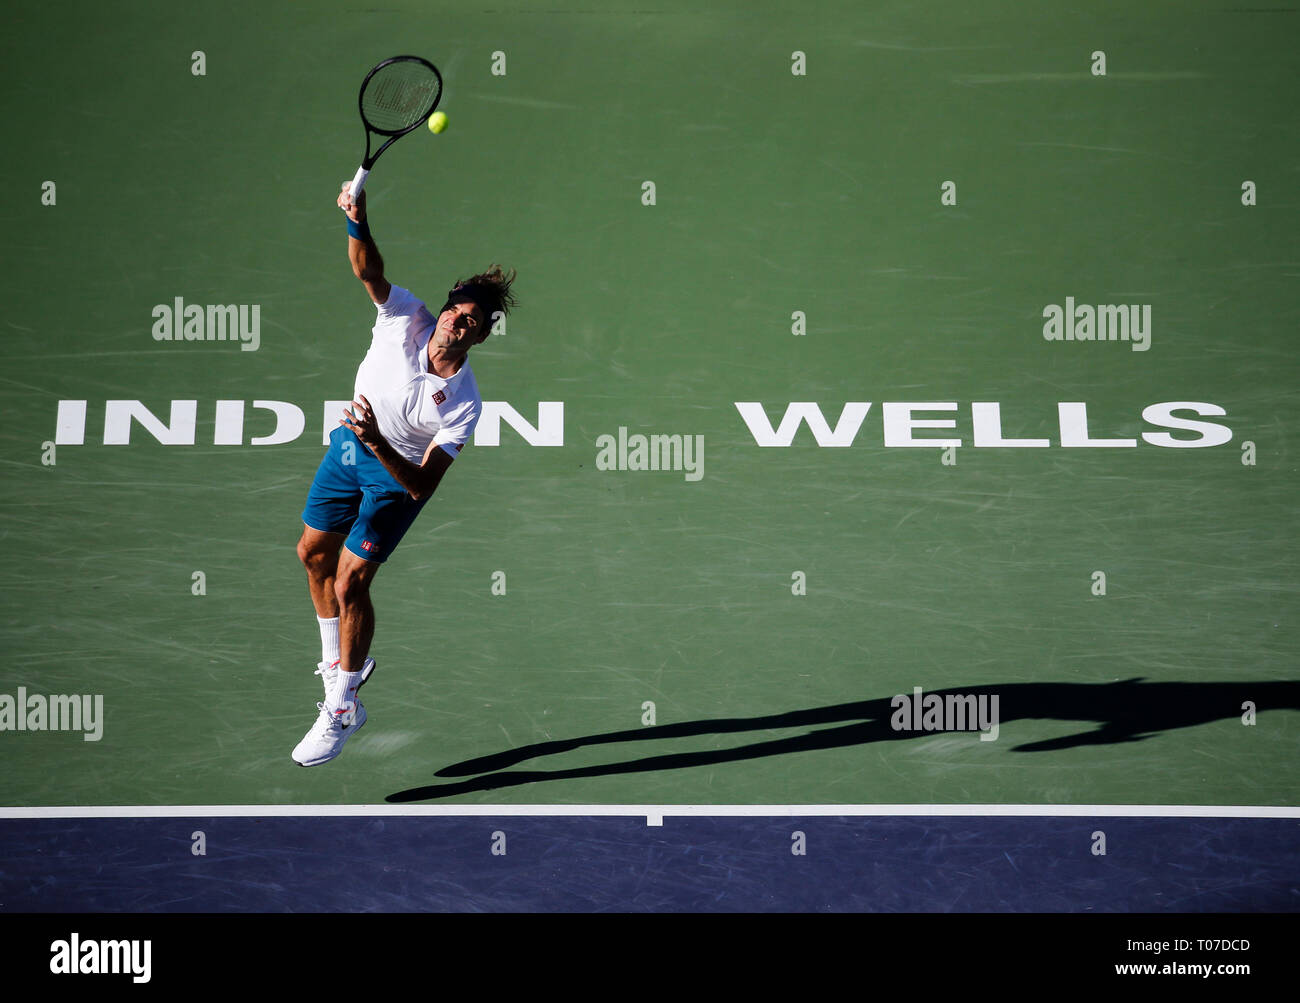 190318) -- INDIAN WELLS, March 18, 2019 (Xinhua) -- Roger Federer of  Switzerland serves during the men's singles final between Dominic Thiem of  Austria and Roger Federer of Switzerland at BNP Paribas